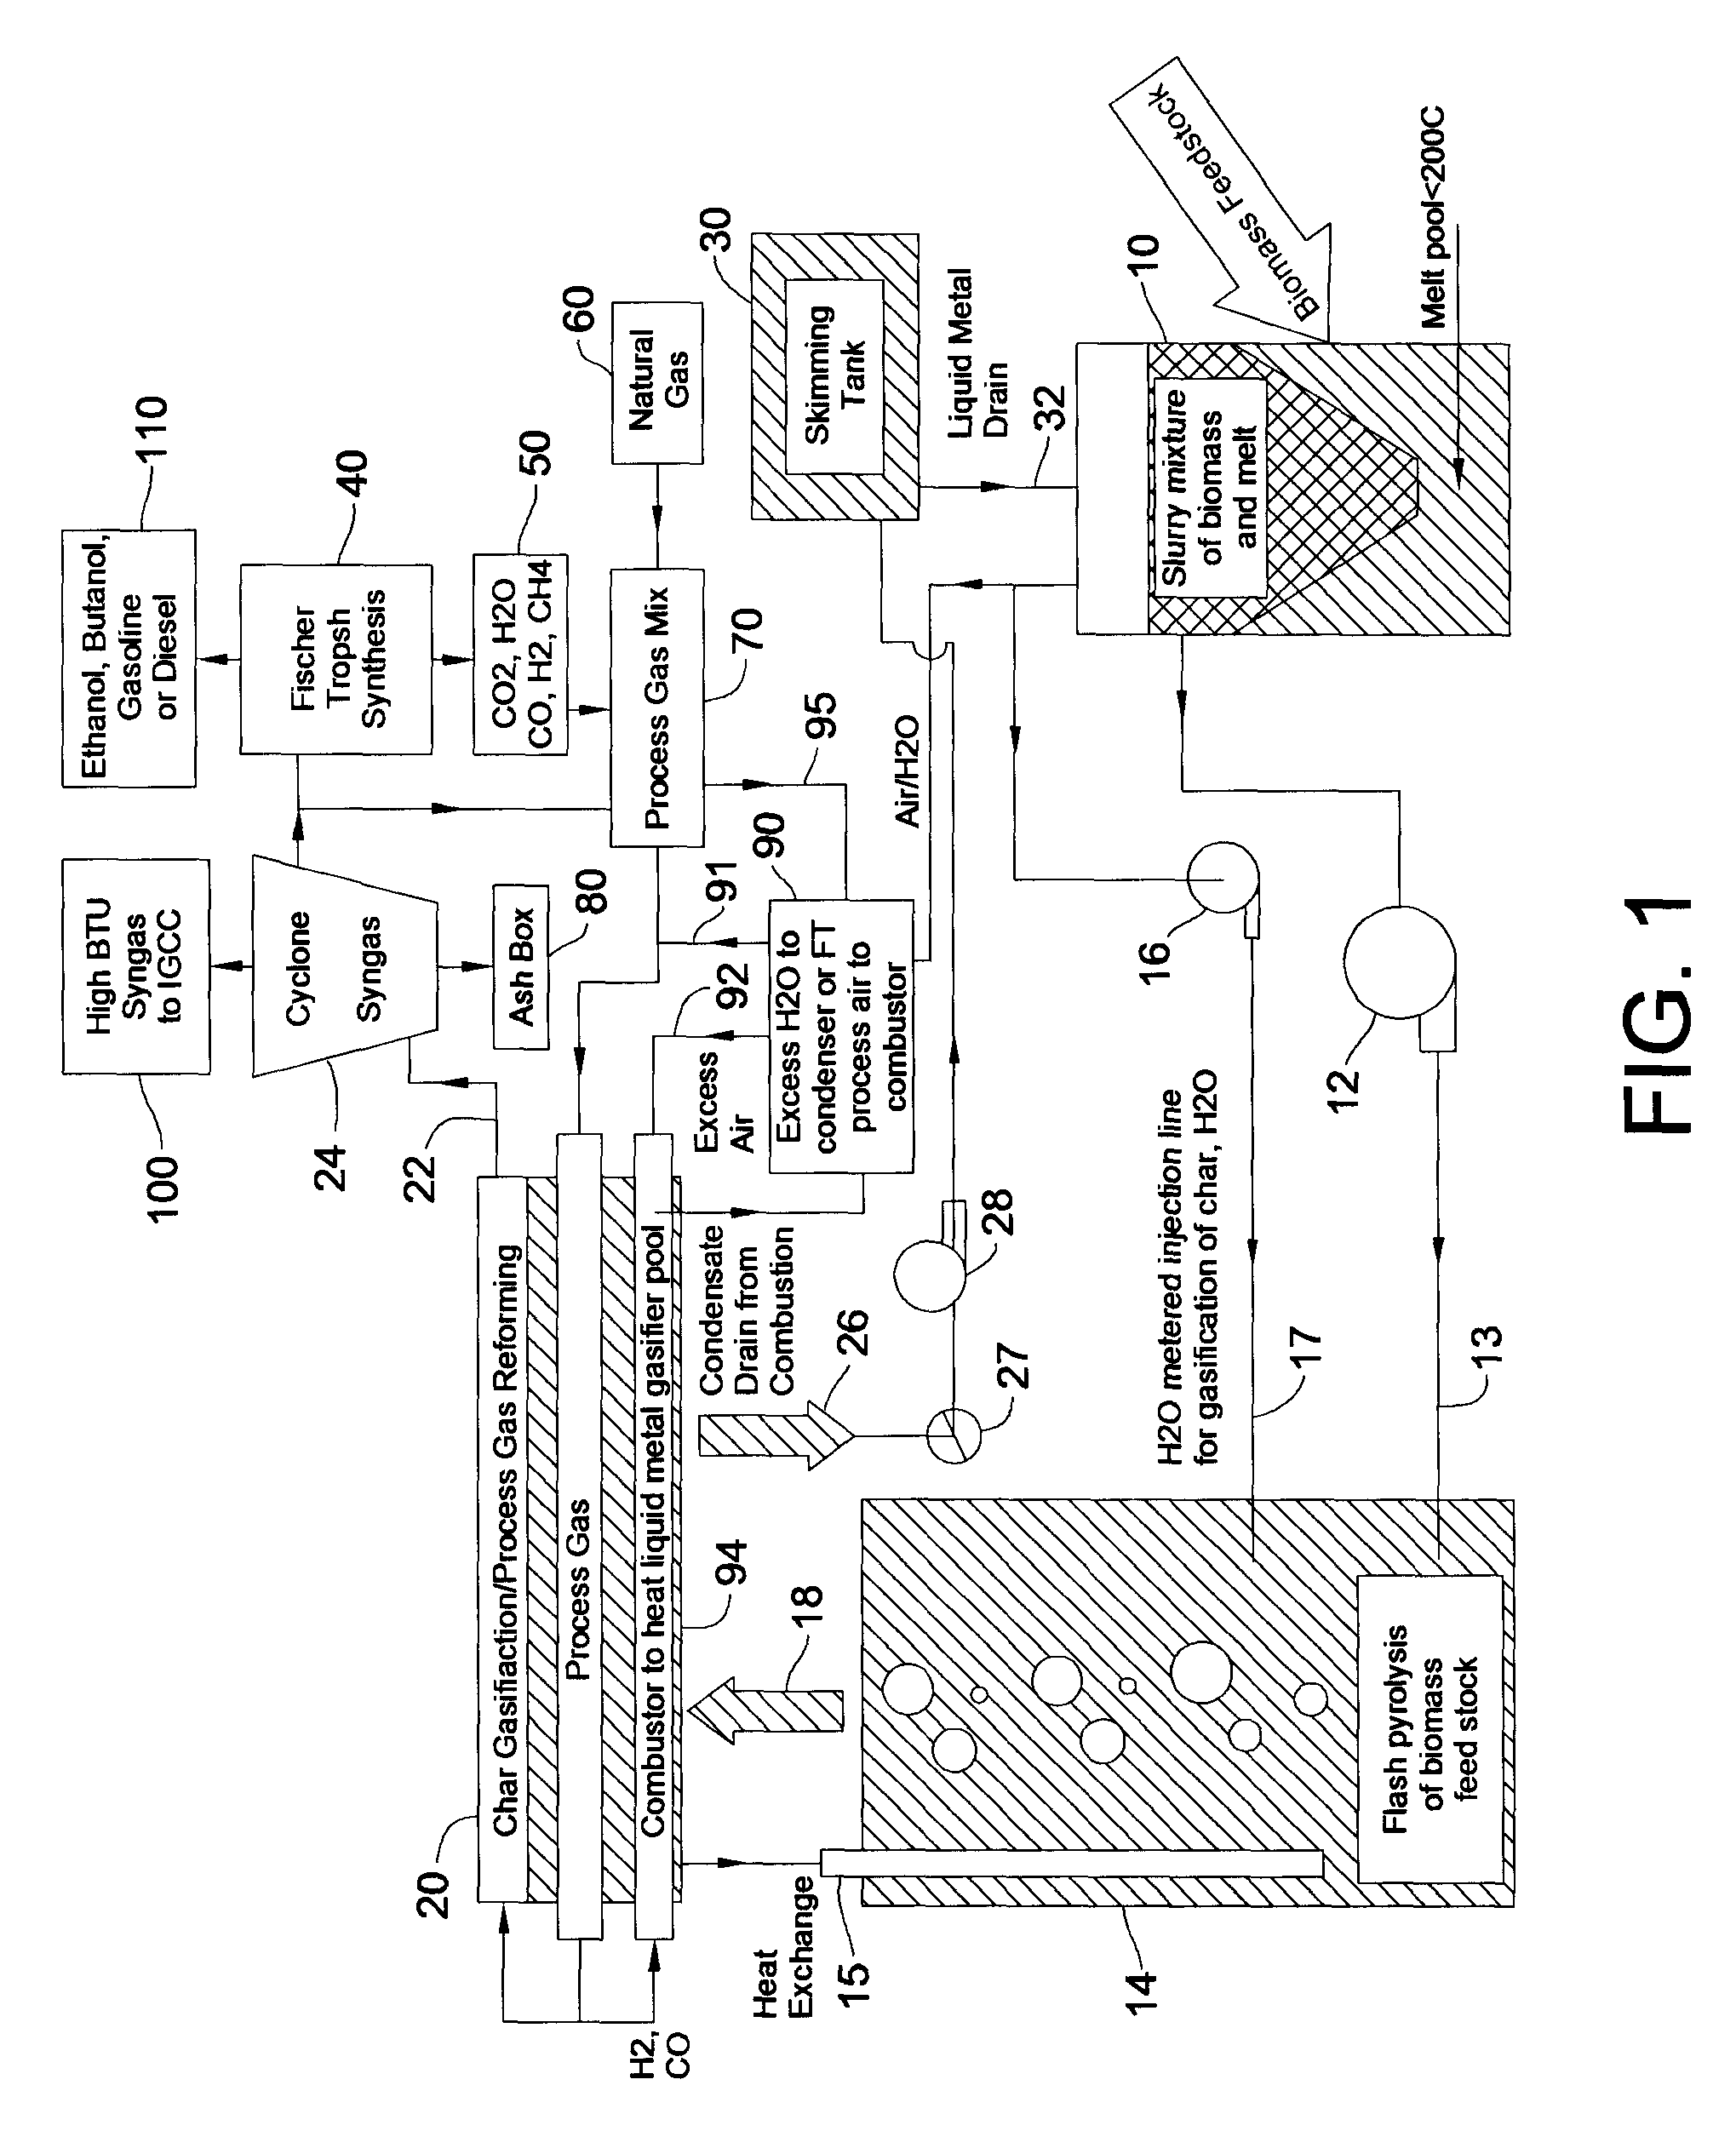 Method and apparatus to produce synthesis gas via flash pyrolysis and gasification in a molten liquid